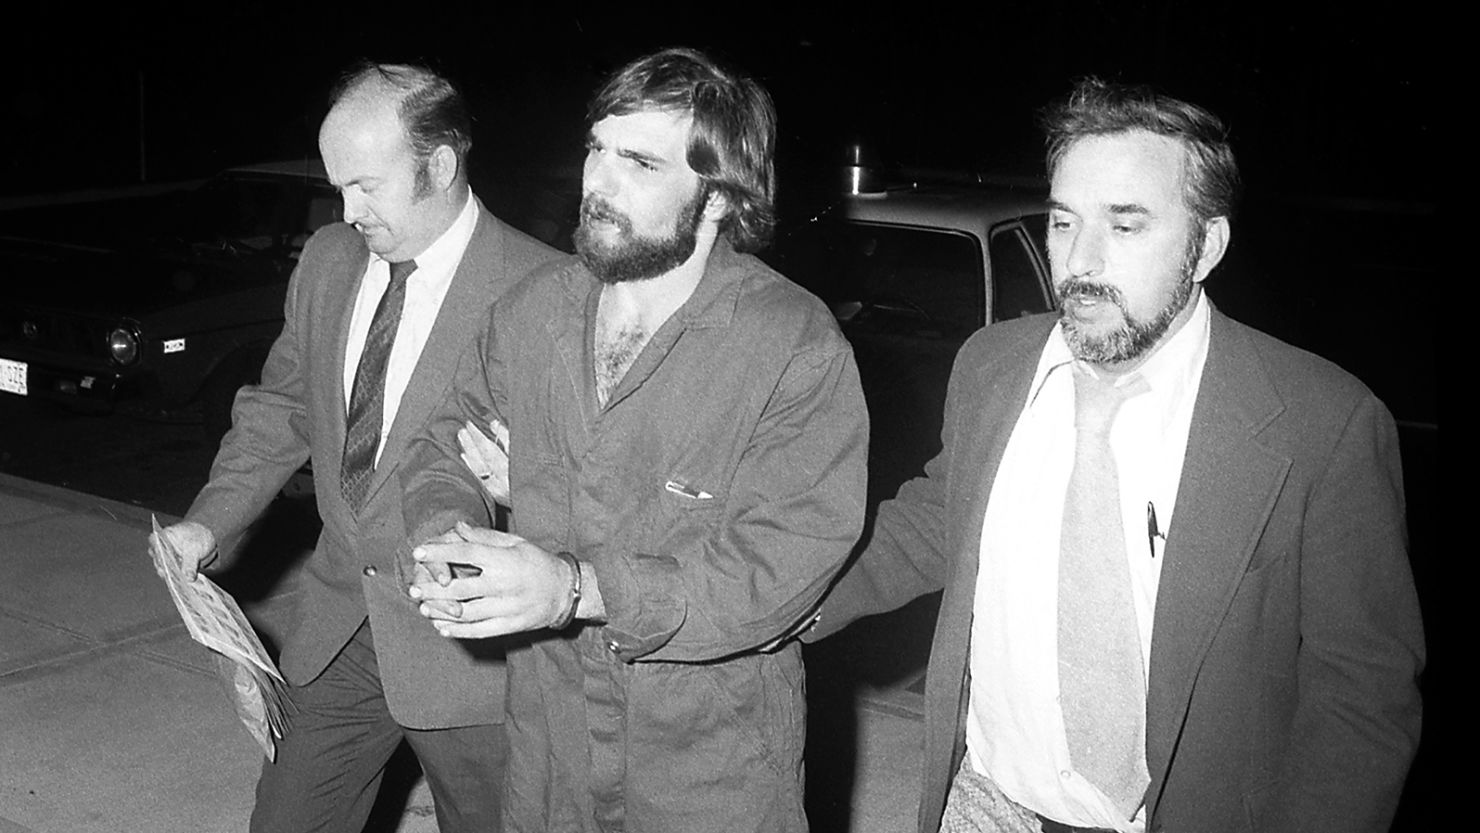 Ronald DeFeo, Jr., pictured here being escorted by detectives in Suffolk County. The killer died at age 69, according to a spokesperson for the New York State Department of Corrections and Community Services.